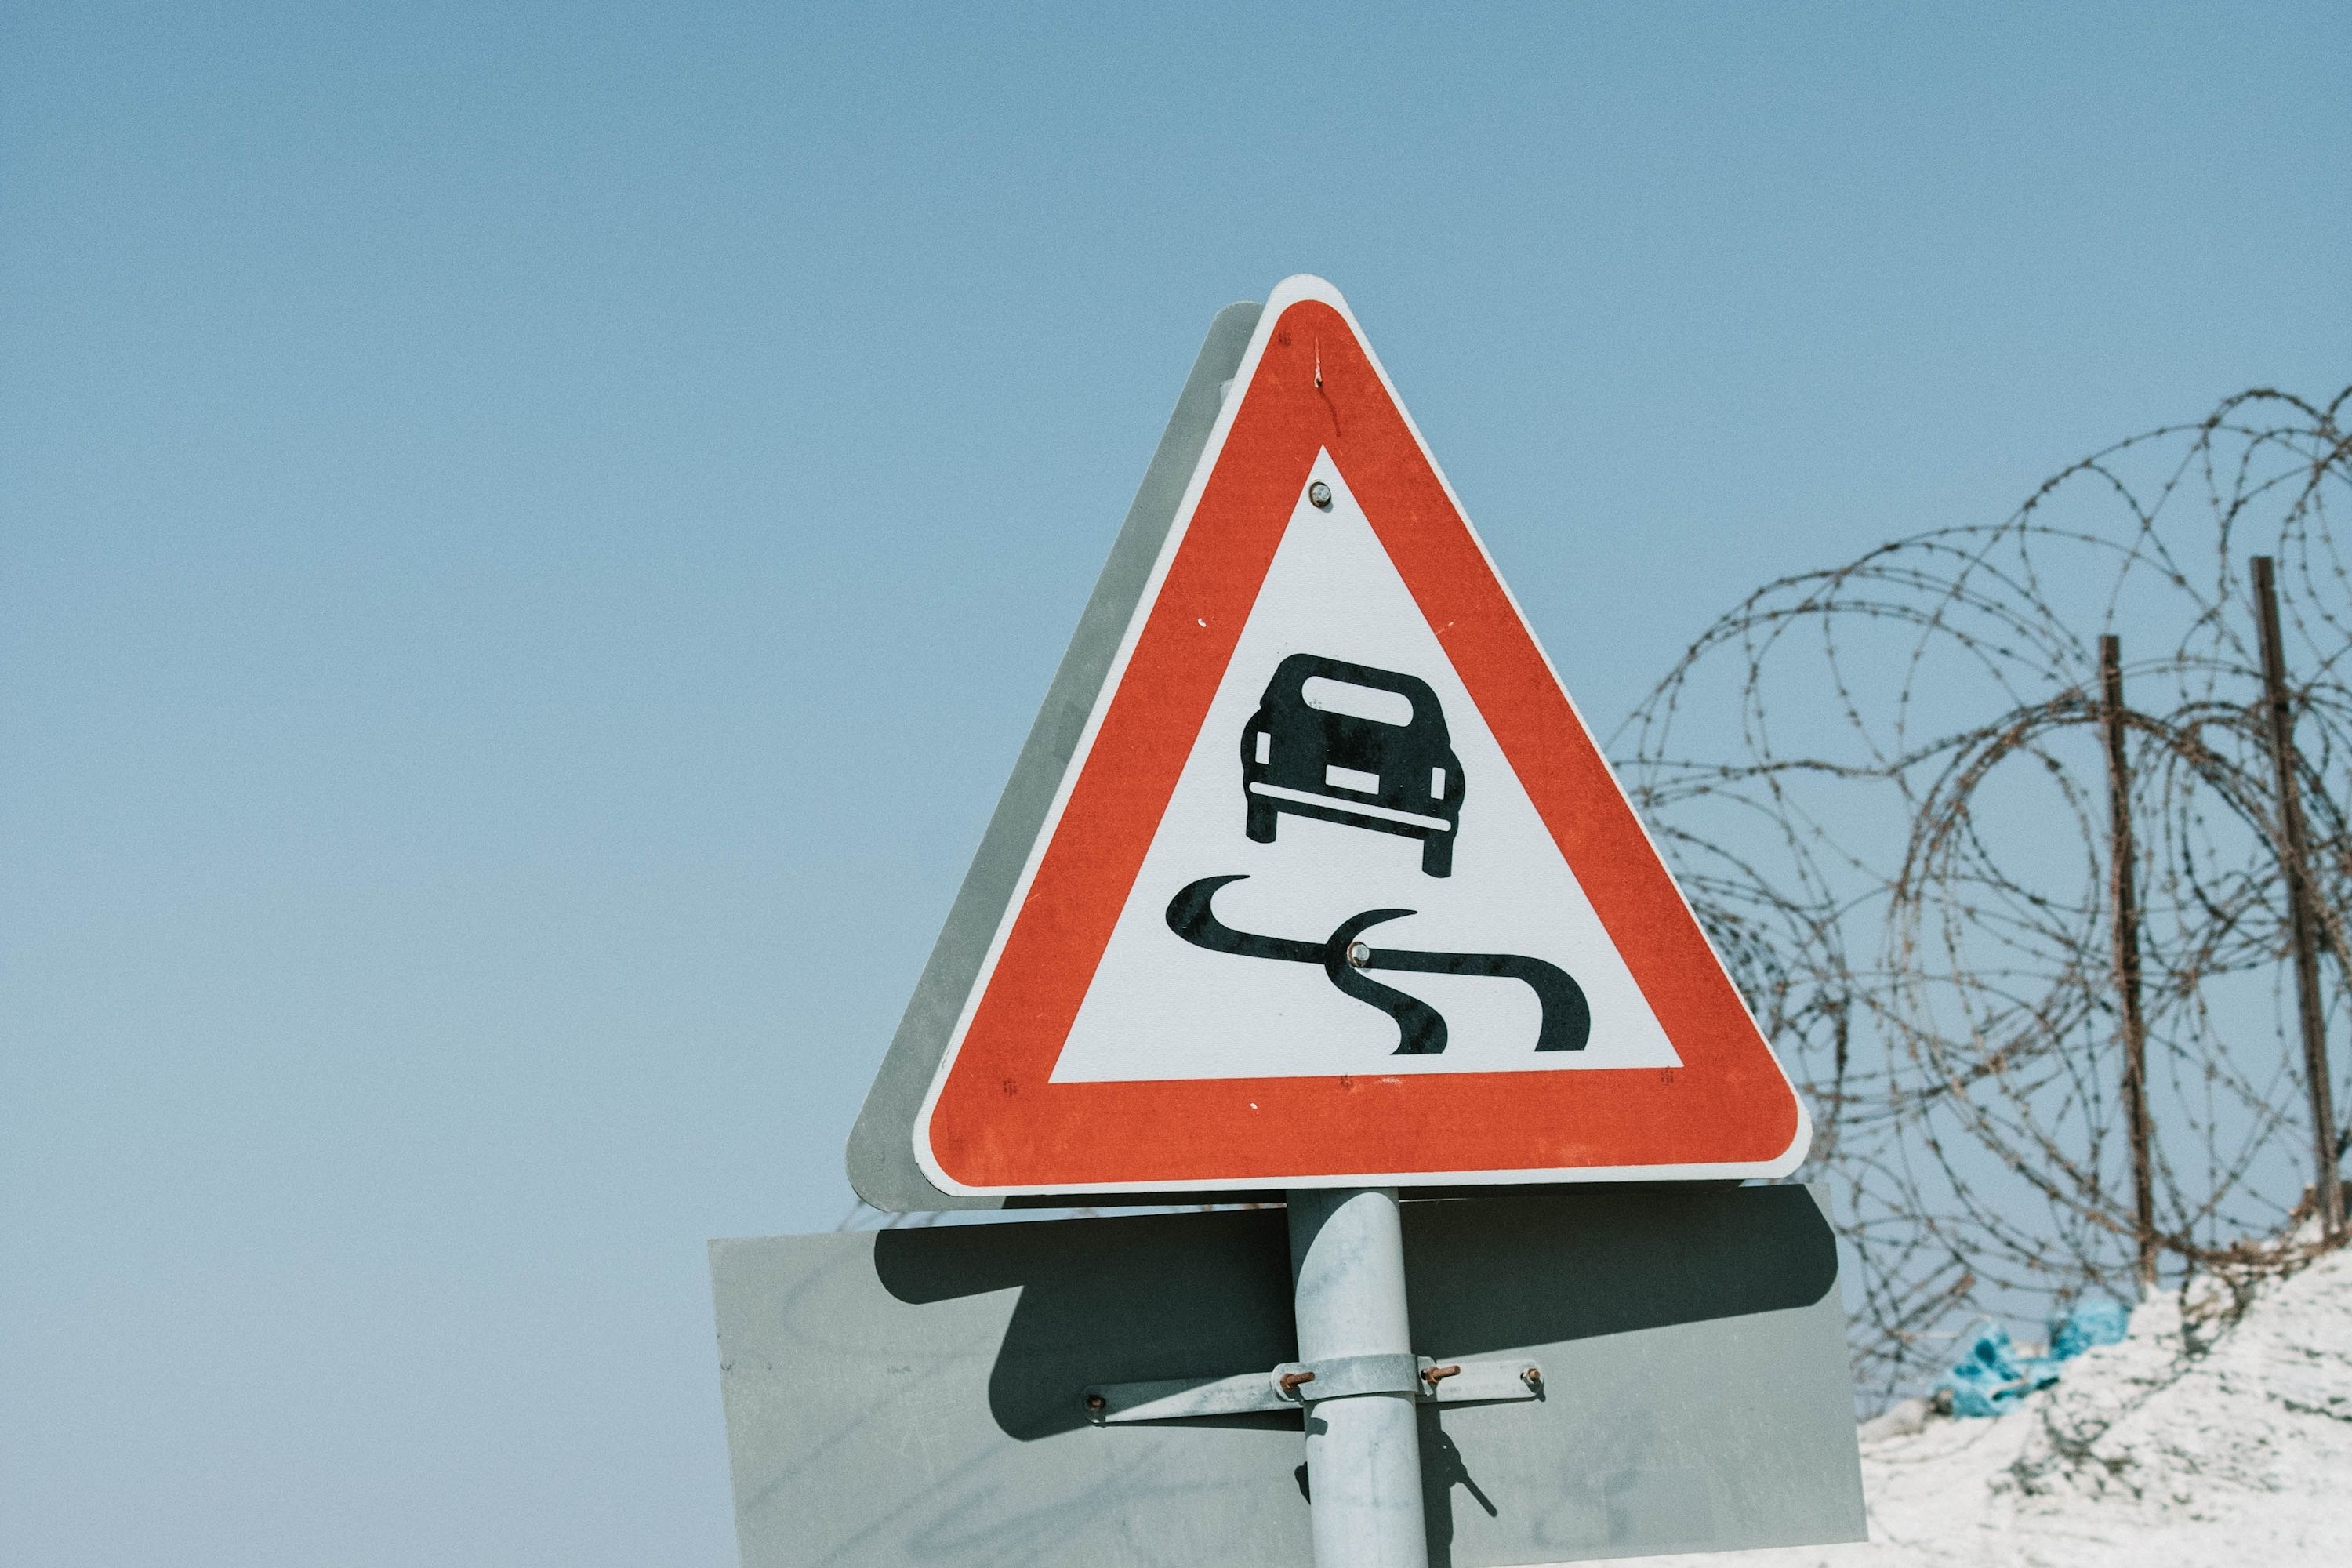 Traction Control And Stability Control: What's The Difference?